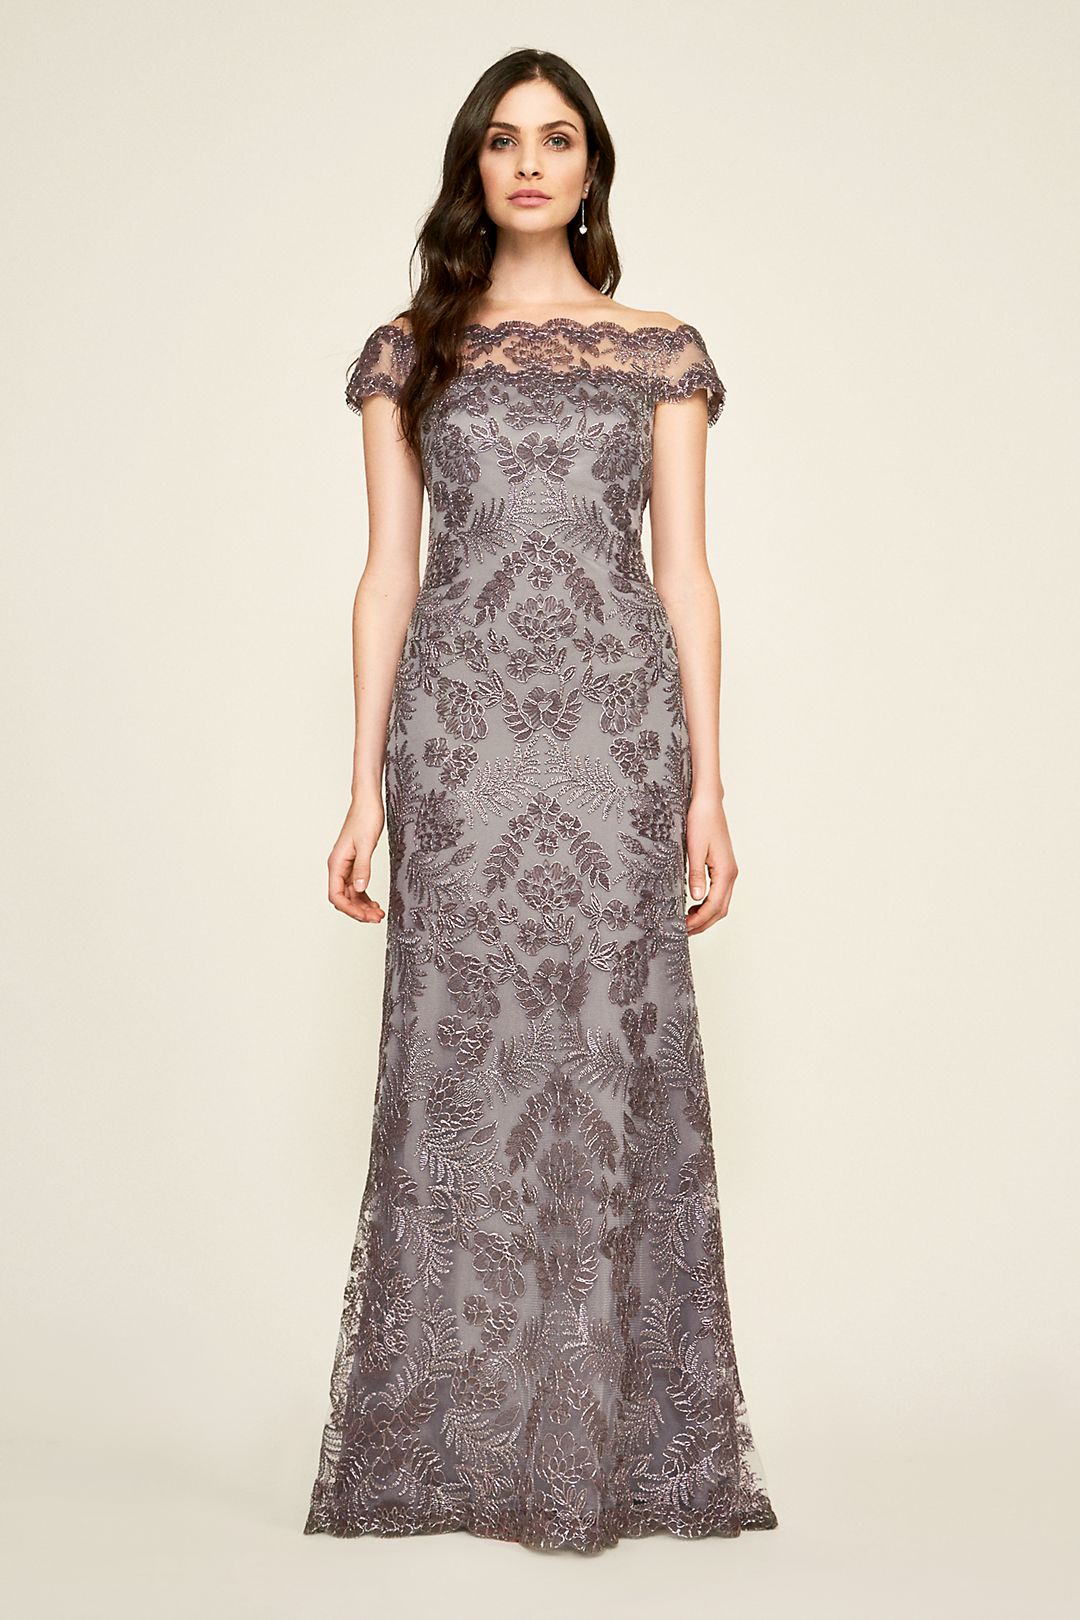 Maura Gown Image 1